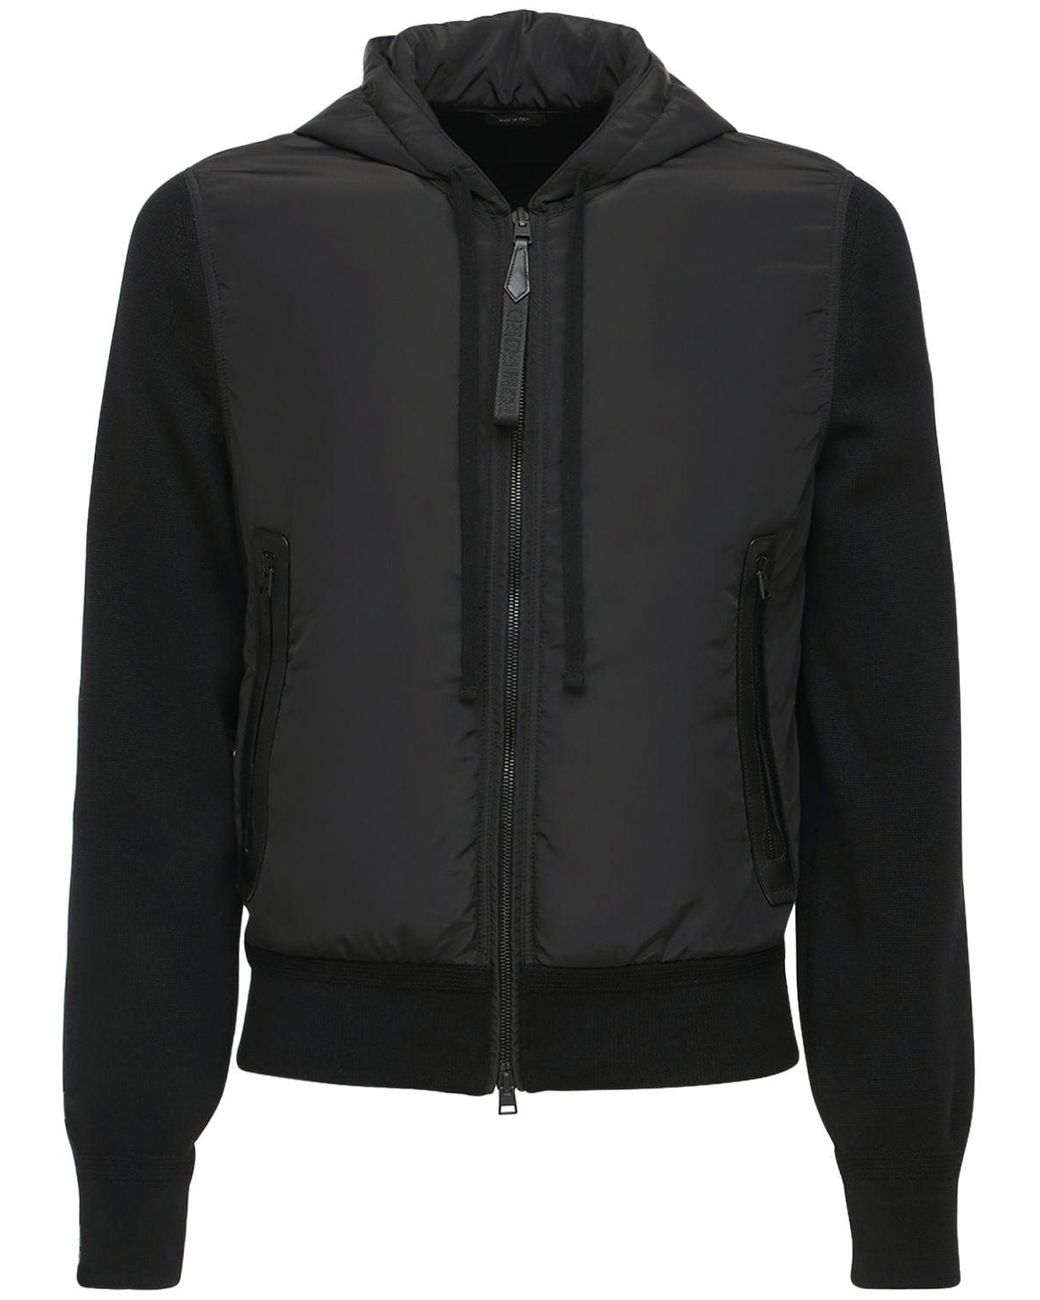 Tom Ford Synthetic Hooded Nylon & Wool Knit Jacket in Black for Men - Lyst